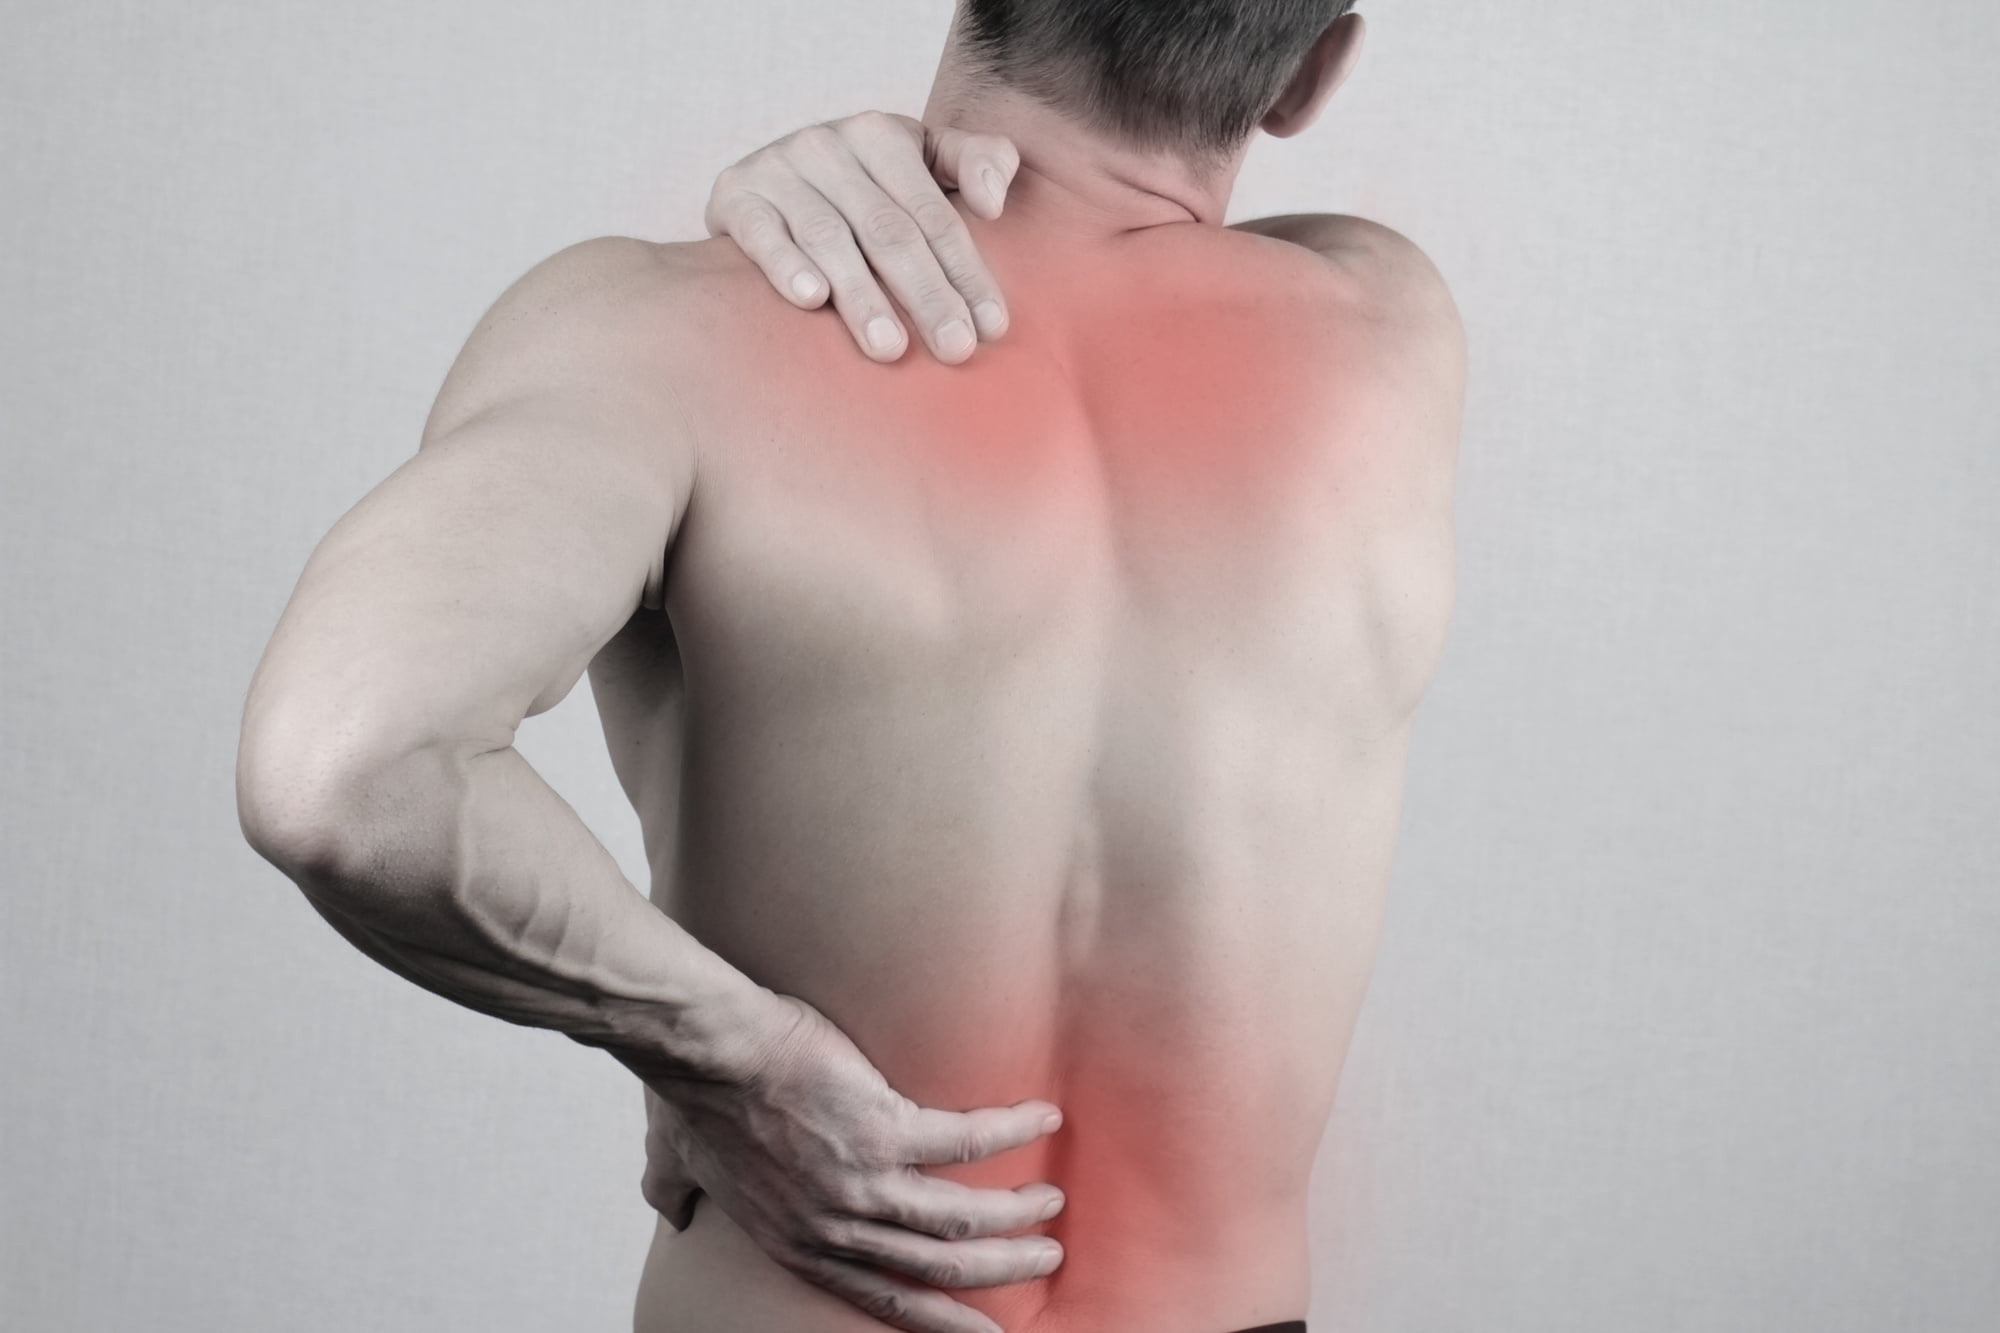 Are you looking at options for alternative pain relief? See our guide as we dive into the alternative choices for natural pain relief that may help you today.